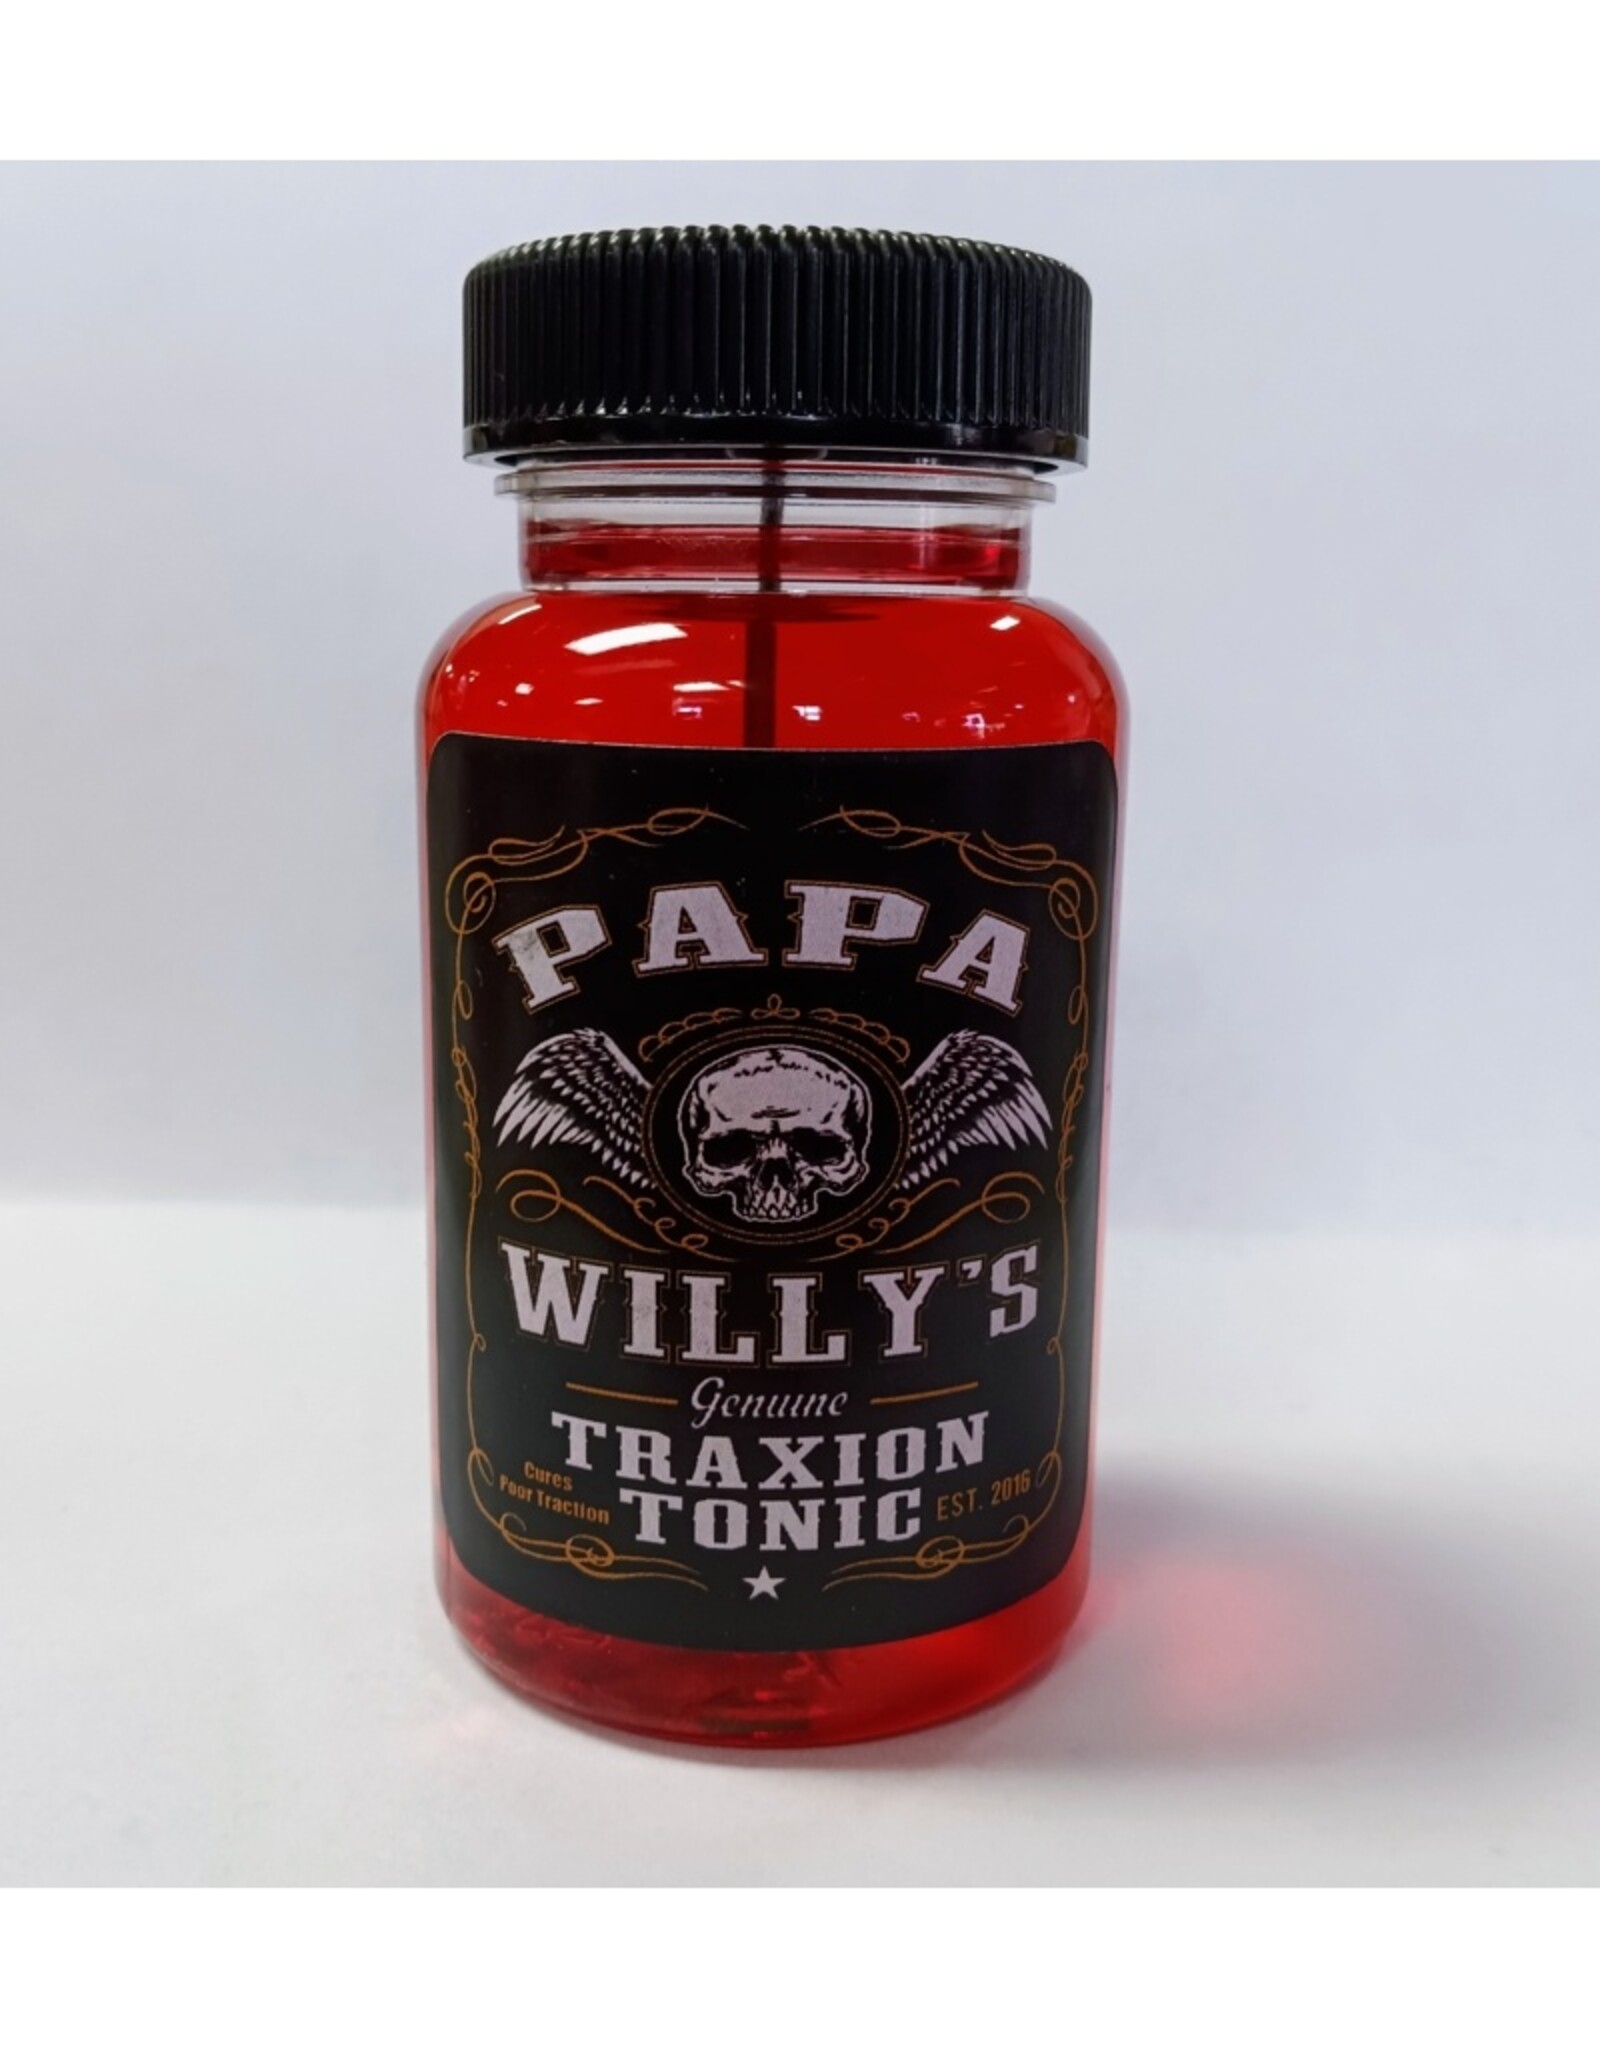 Papa Willy's PAPA WILLY'S TRACTION TONIC: STRAWBERRY